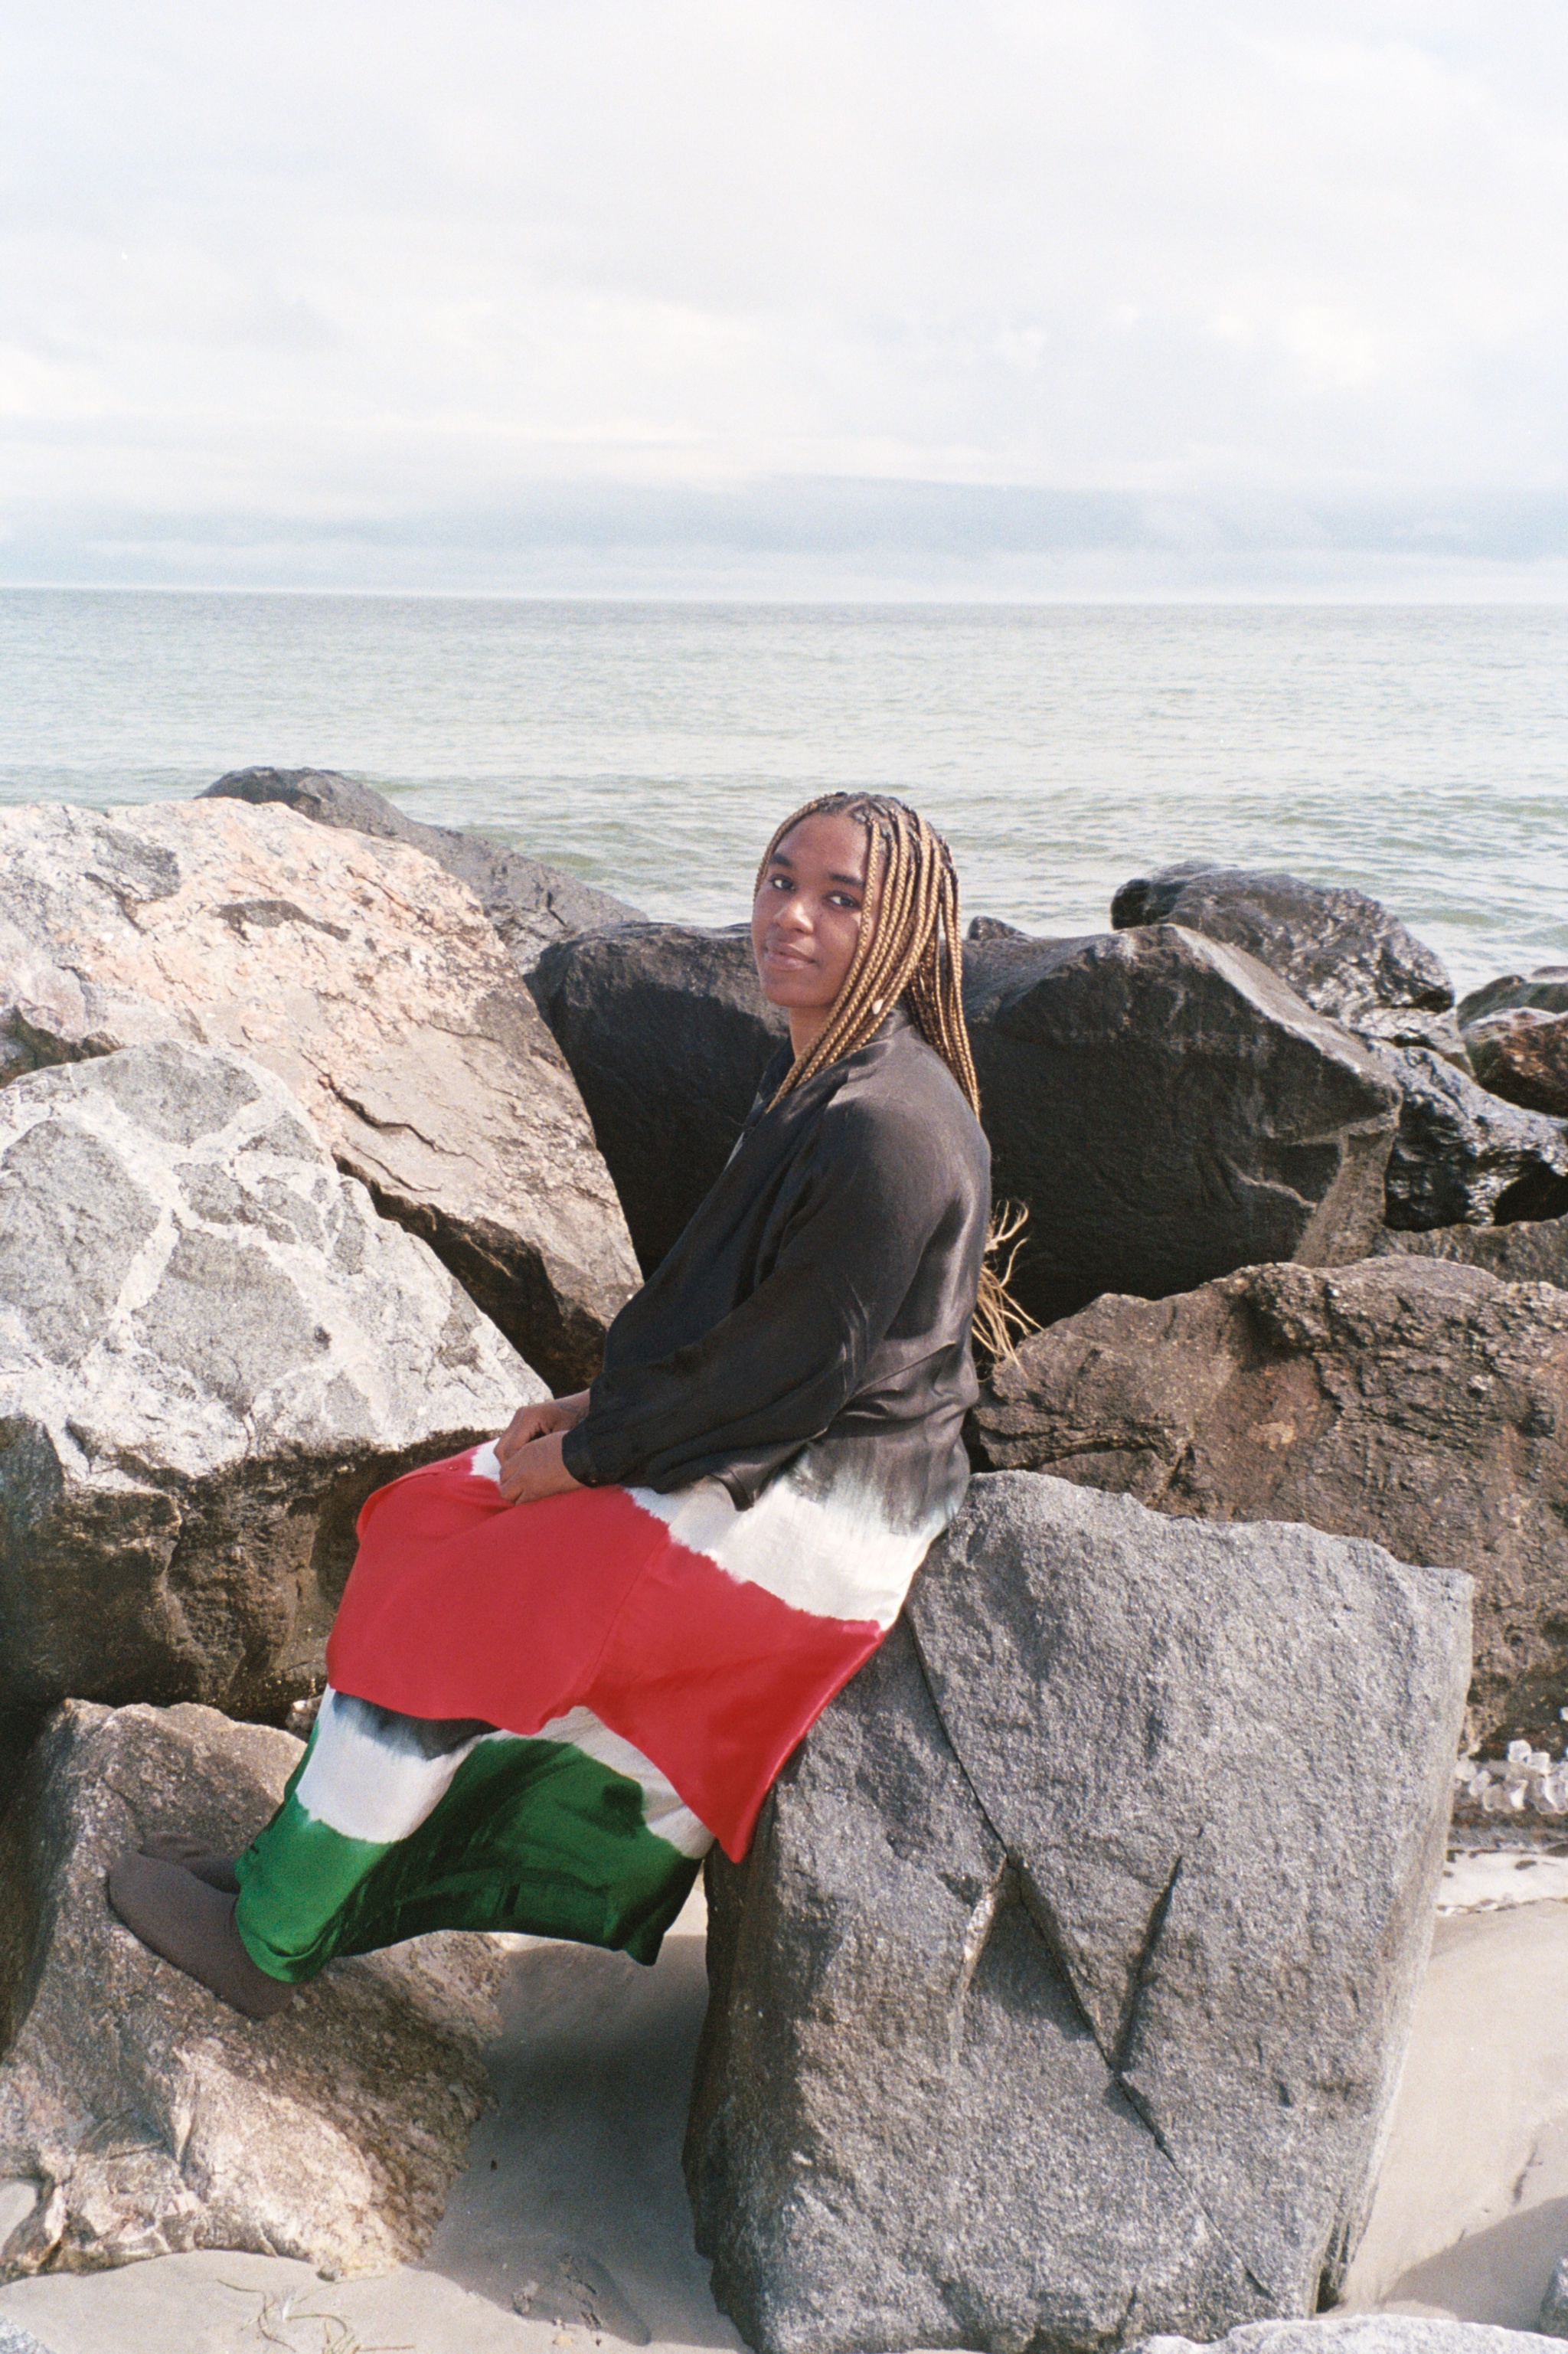 Yaz Lancaster, a nonbinary Black artist, sits on large boulders along a seashore. They have long locs that hang beneath their shoulders. Yaz looks back at us over one shoulder. They wear a long dress with bands of color: black, white, red, and green.